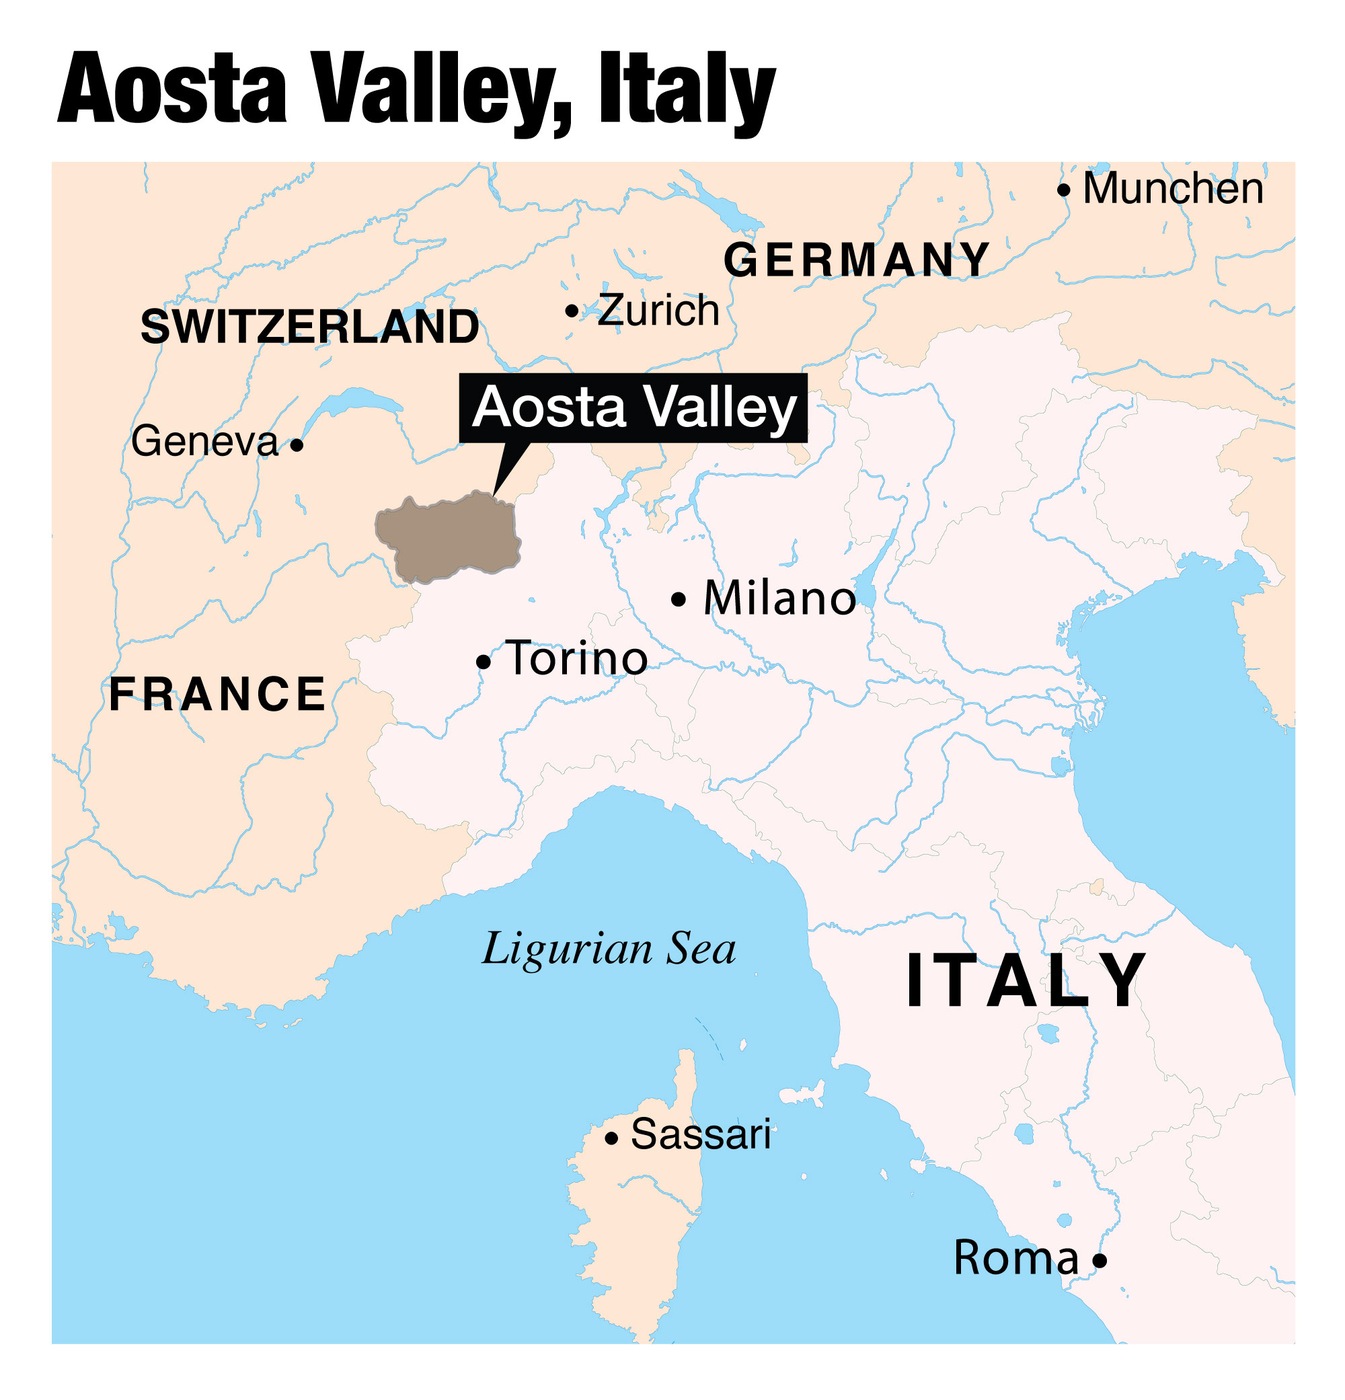 This map shows the location of Italy's Aosta Valley, where some of Liam Biran's belongings were found following his disappearance.